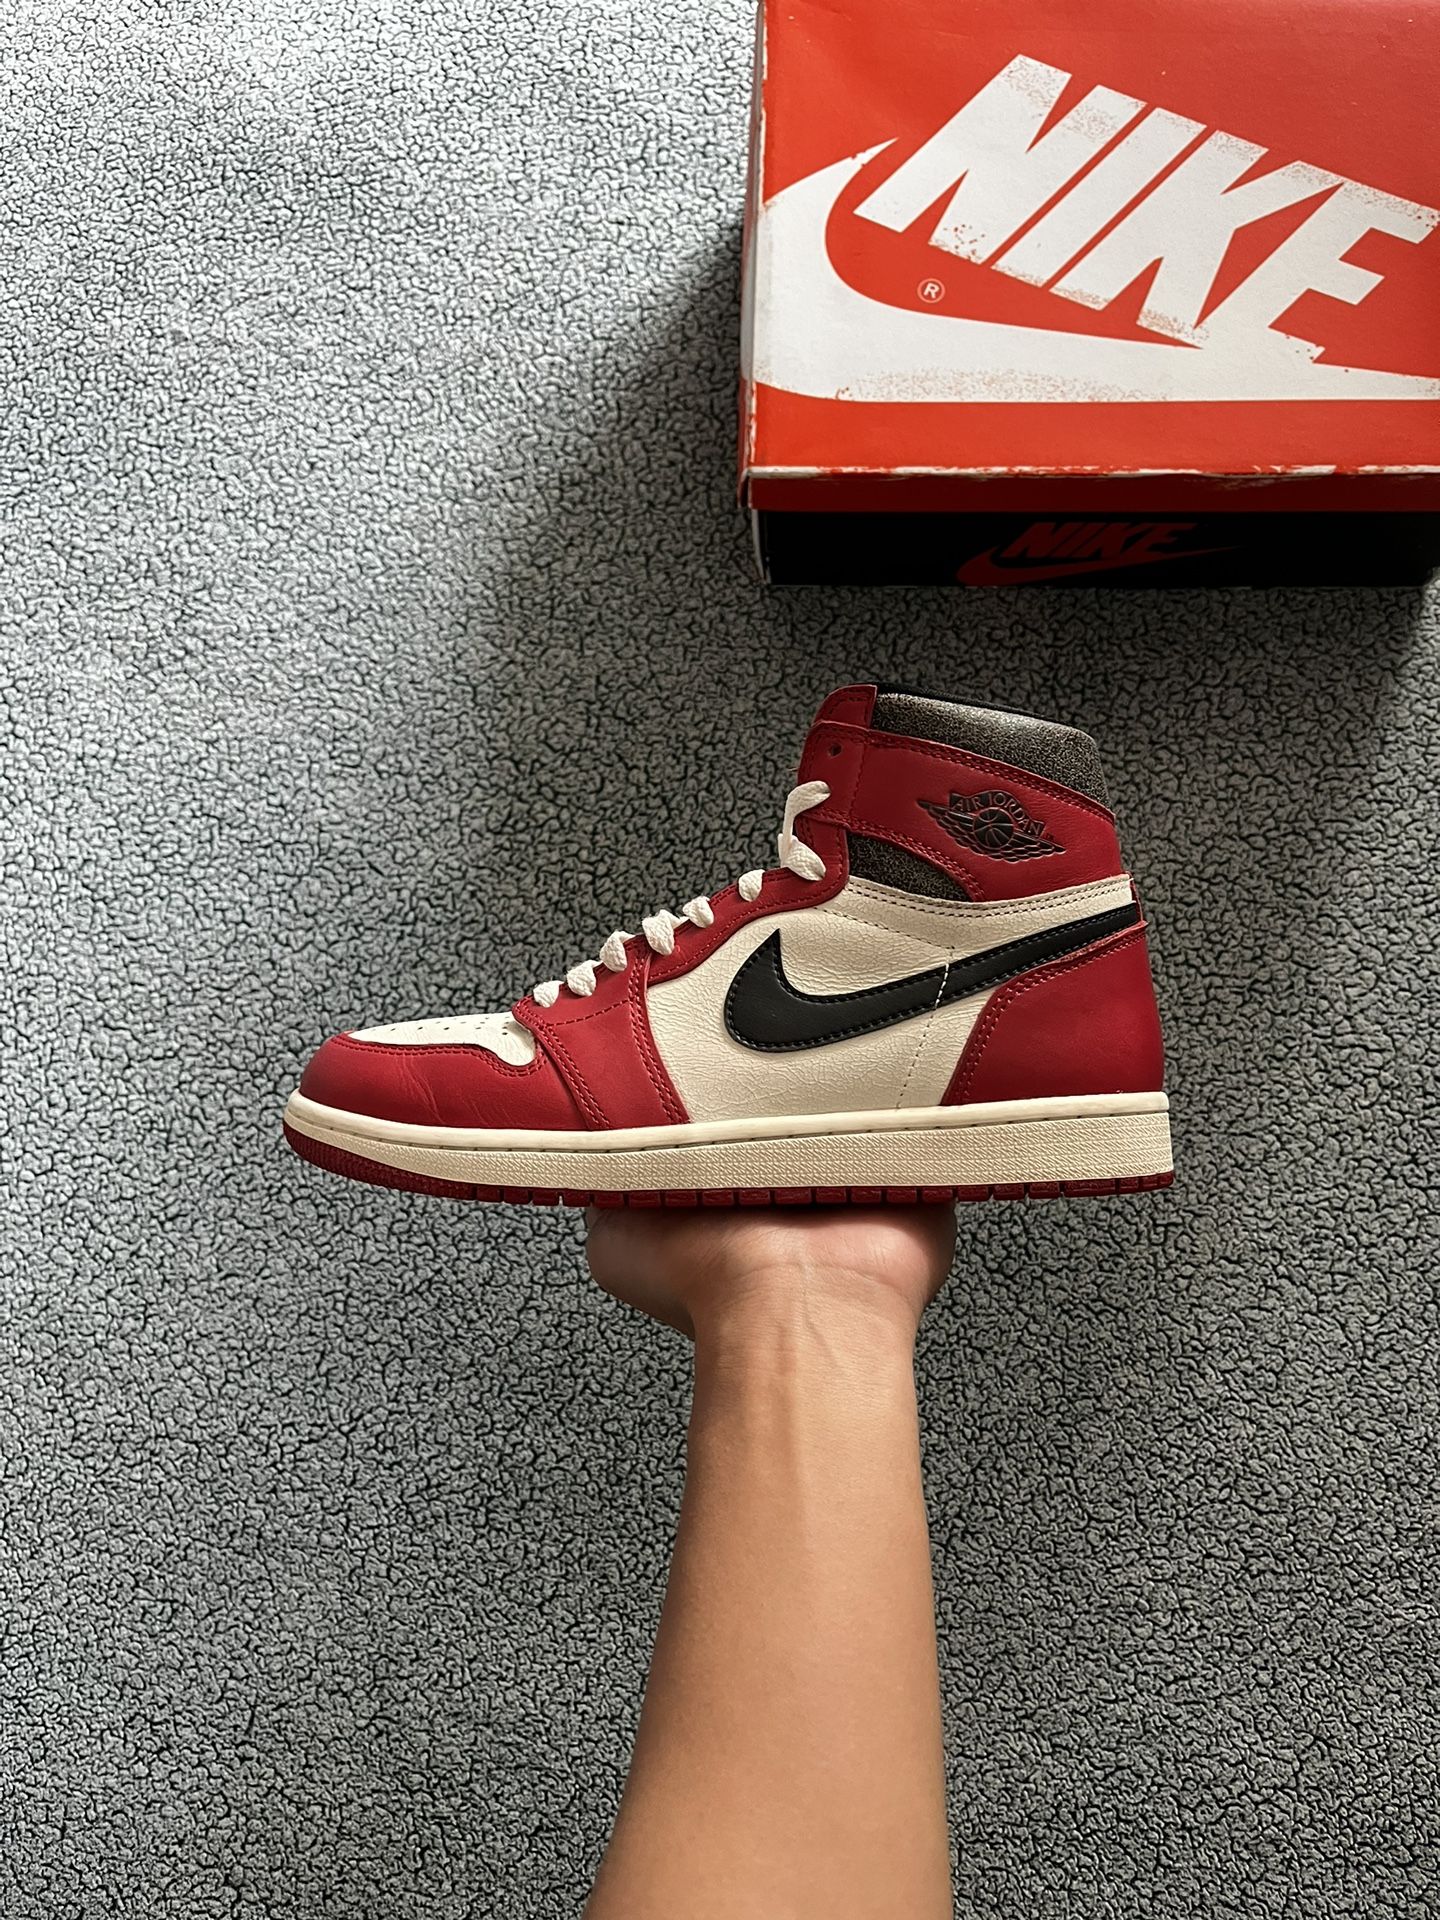 Jordan 1 Lost And Found 